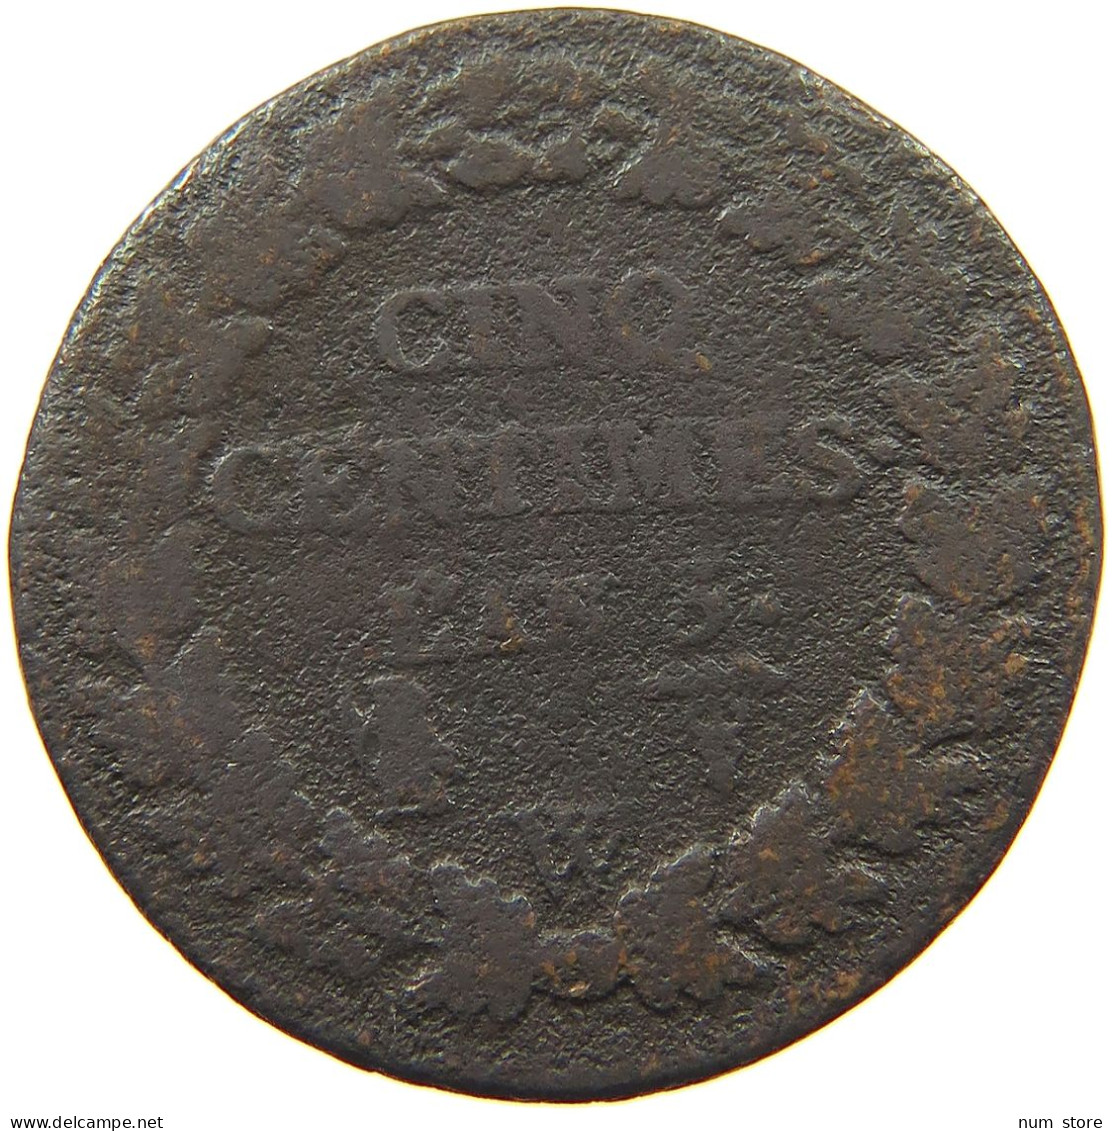 FRANCE 5 CENTIMES AN 5 W  #a059 0289 - 5 Centimes